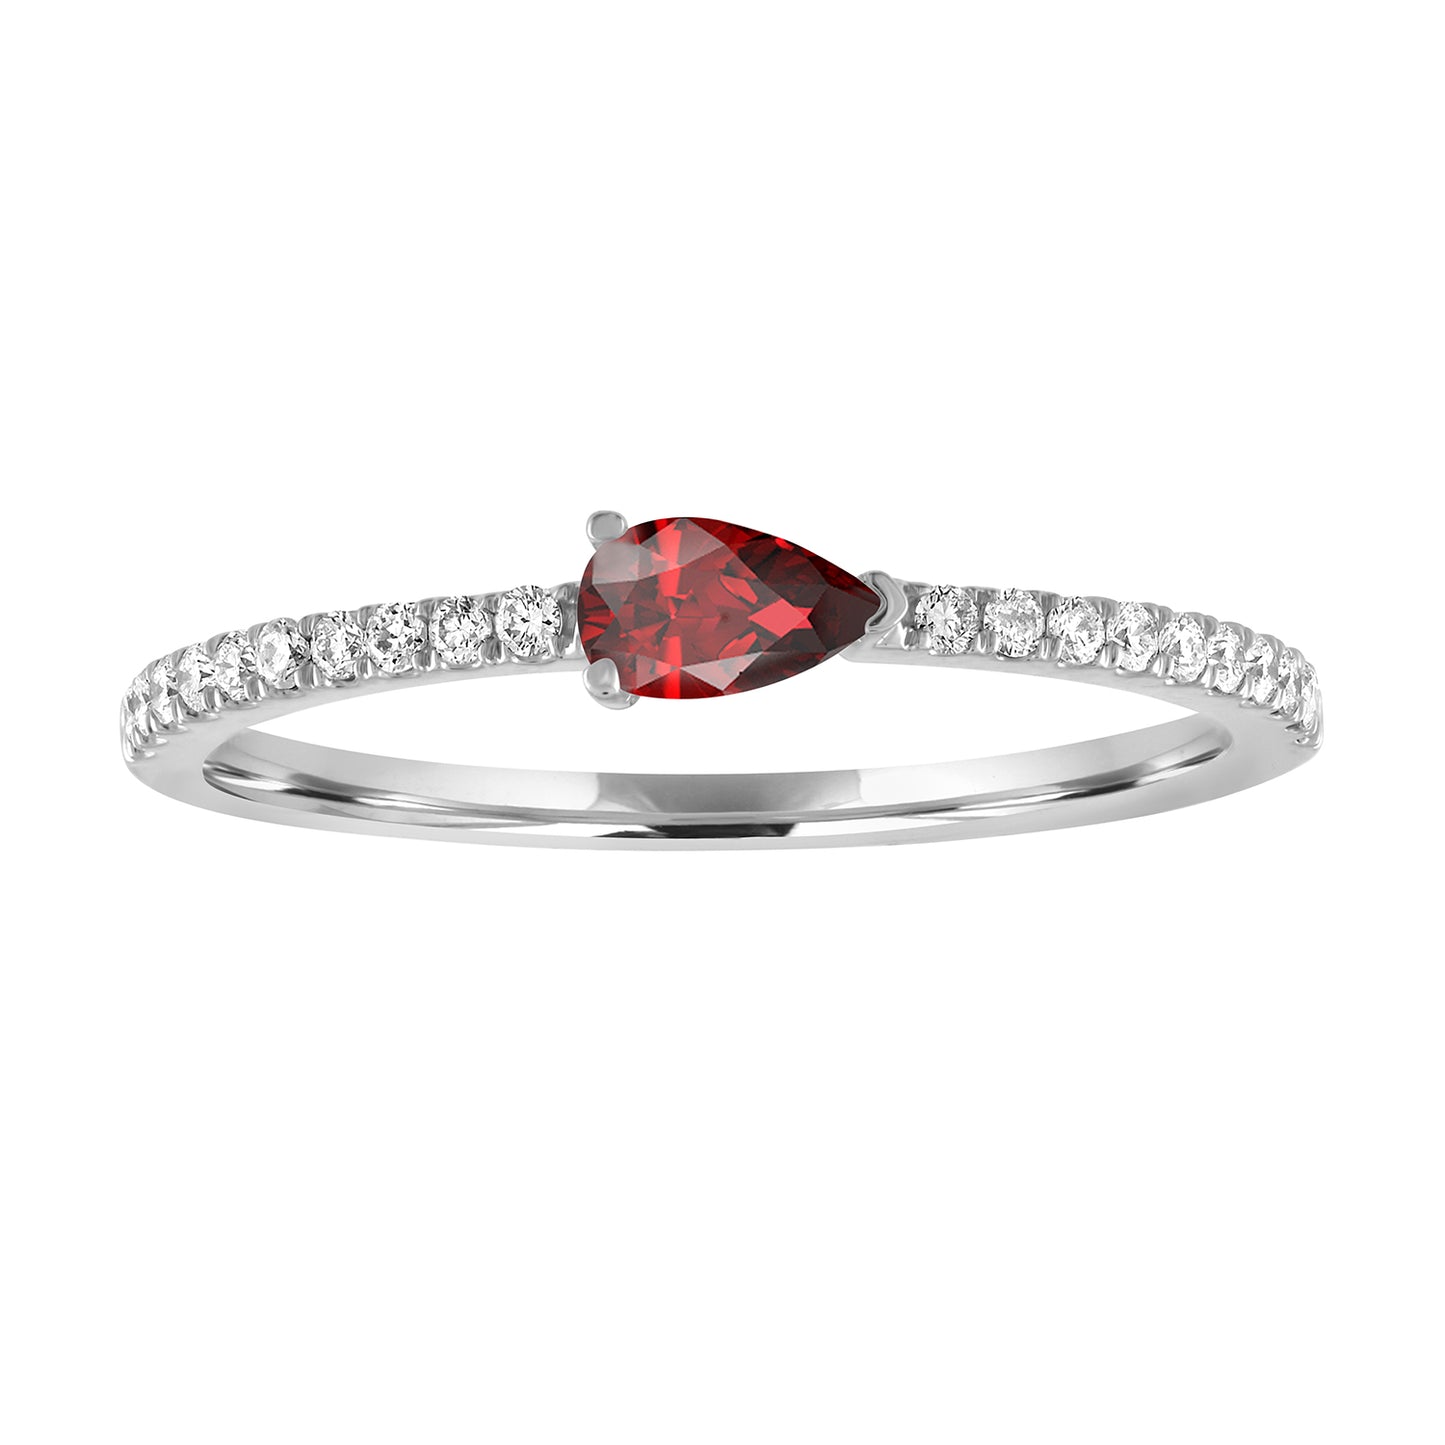 White gold skinny band with a pear shaped garnet in the center and round diamonds on the shank. 